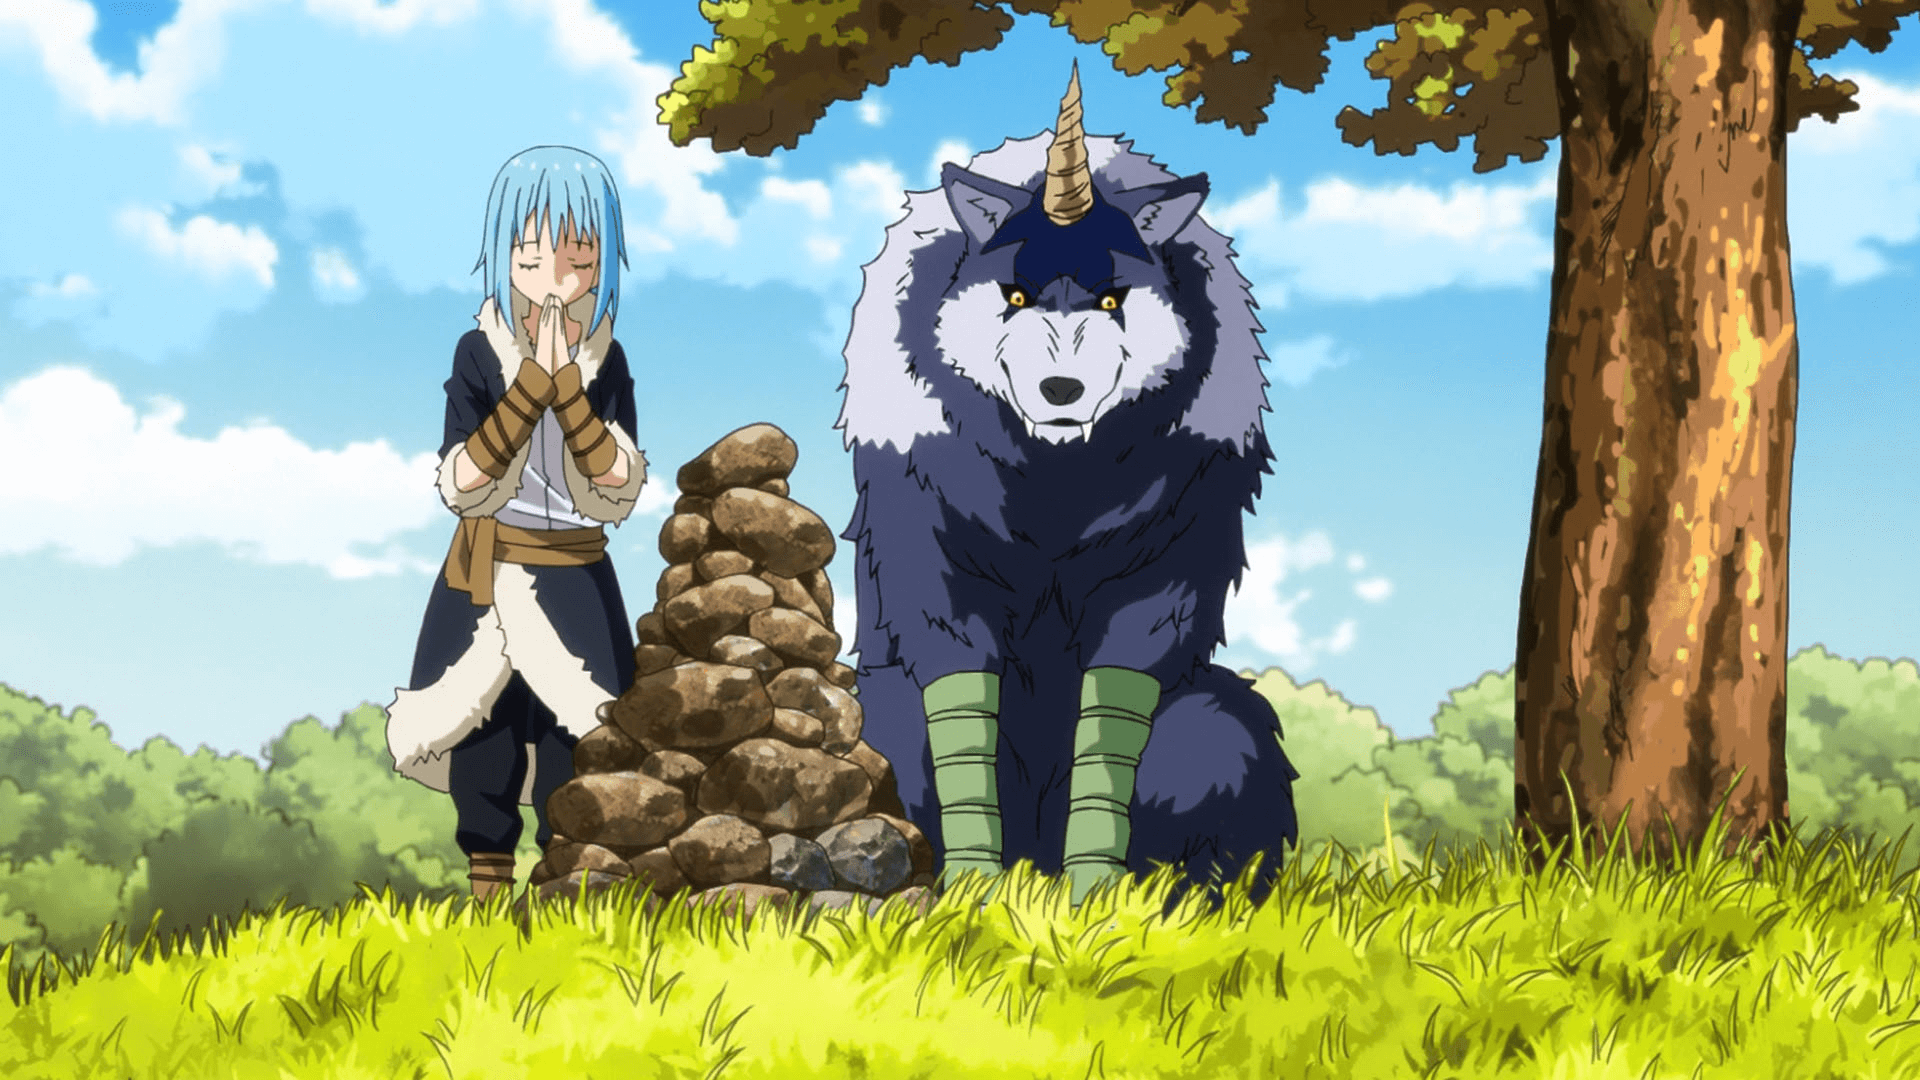 That Time I Got Reincarnated As A Slime Desktop Wallpapers Wallpaper Cave